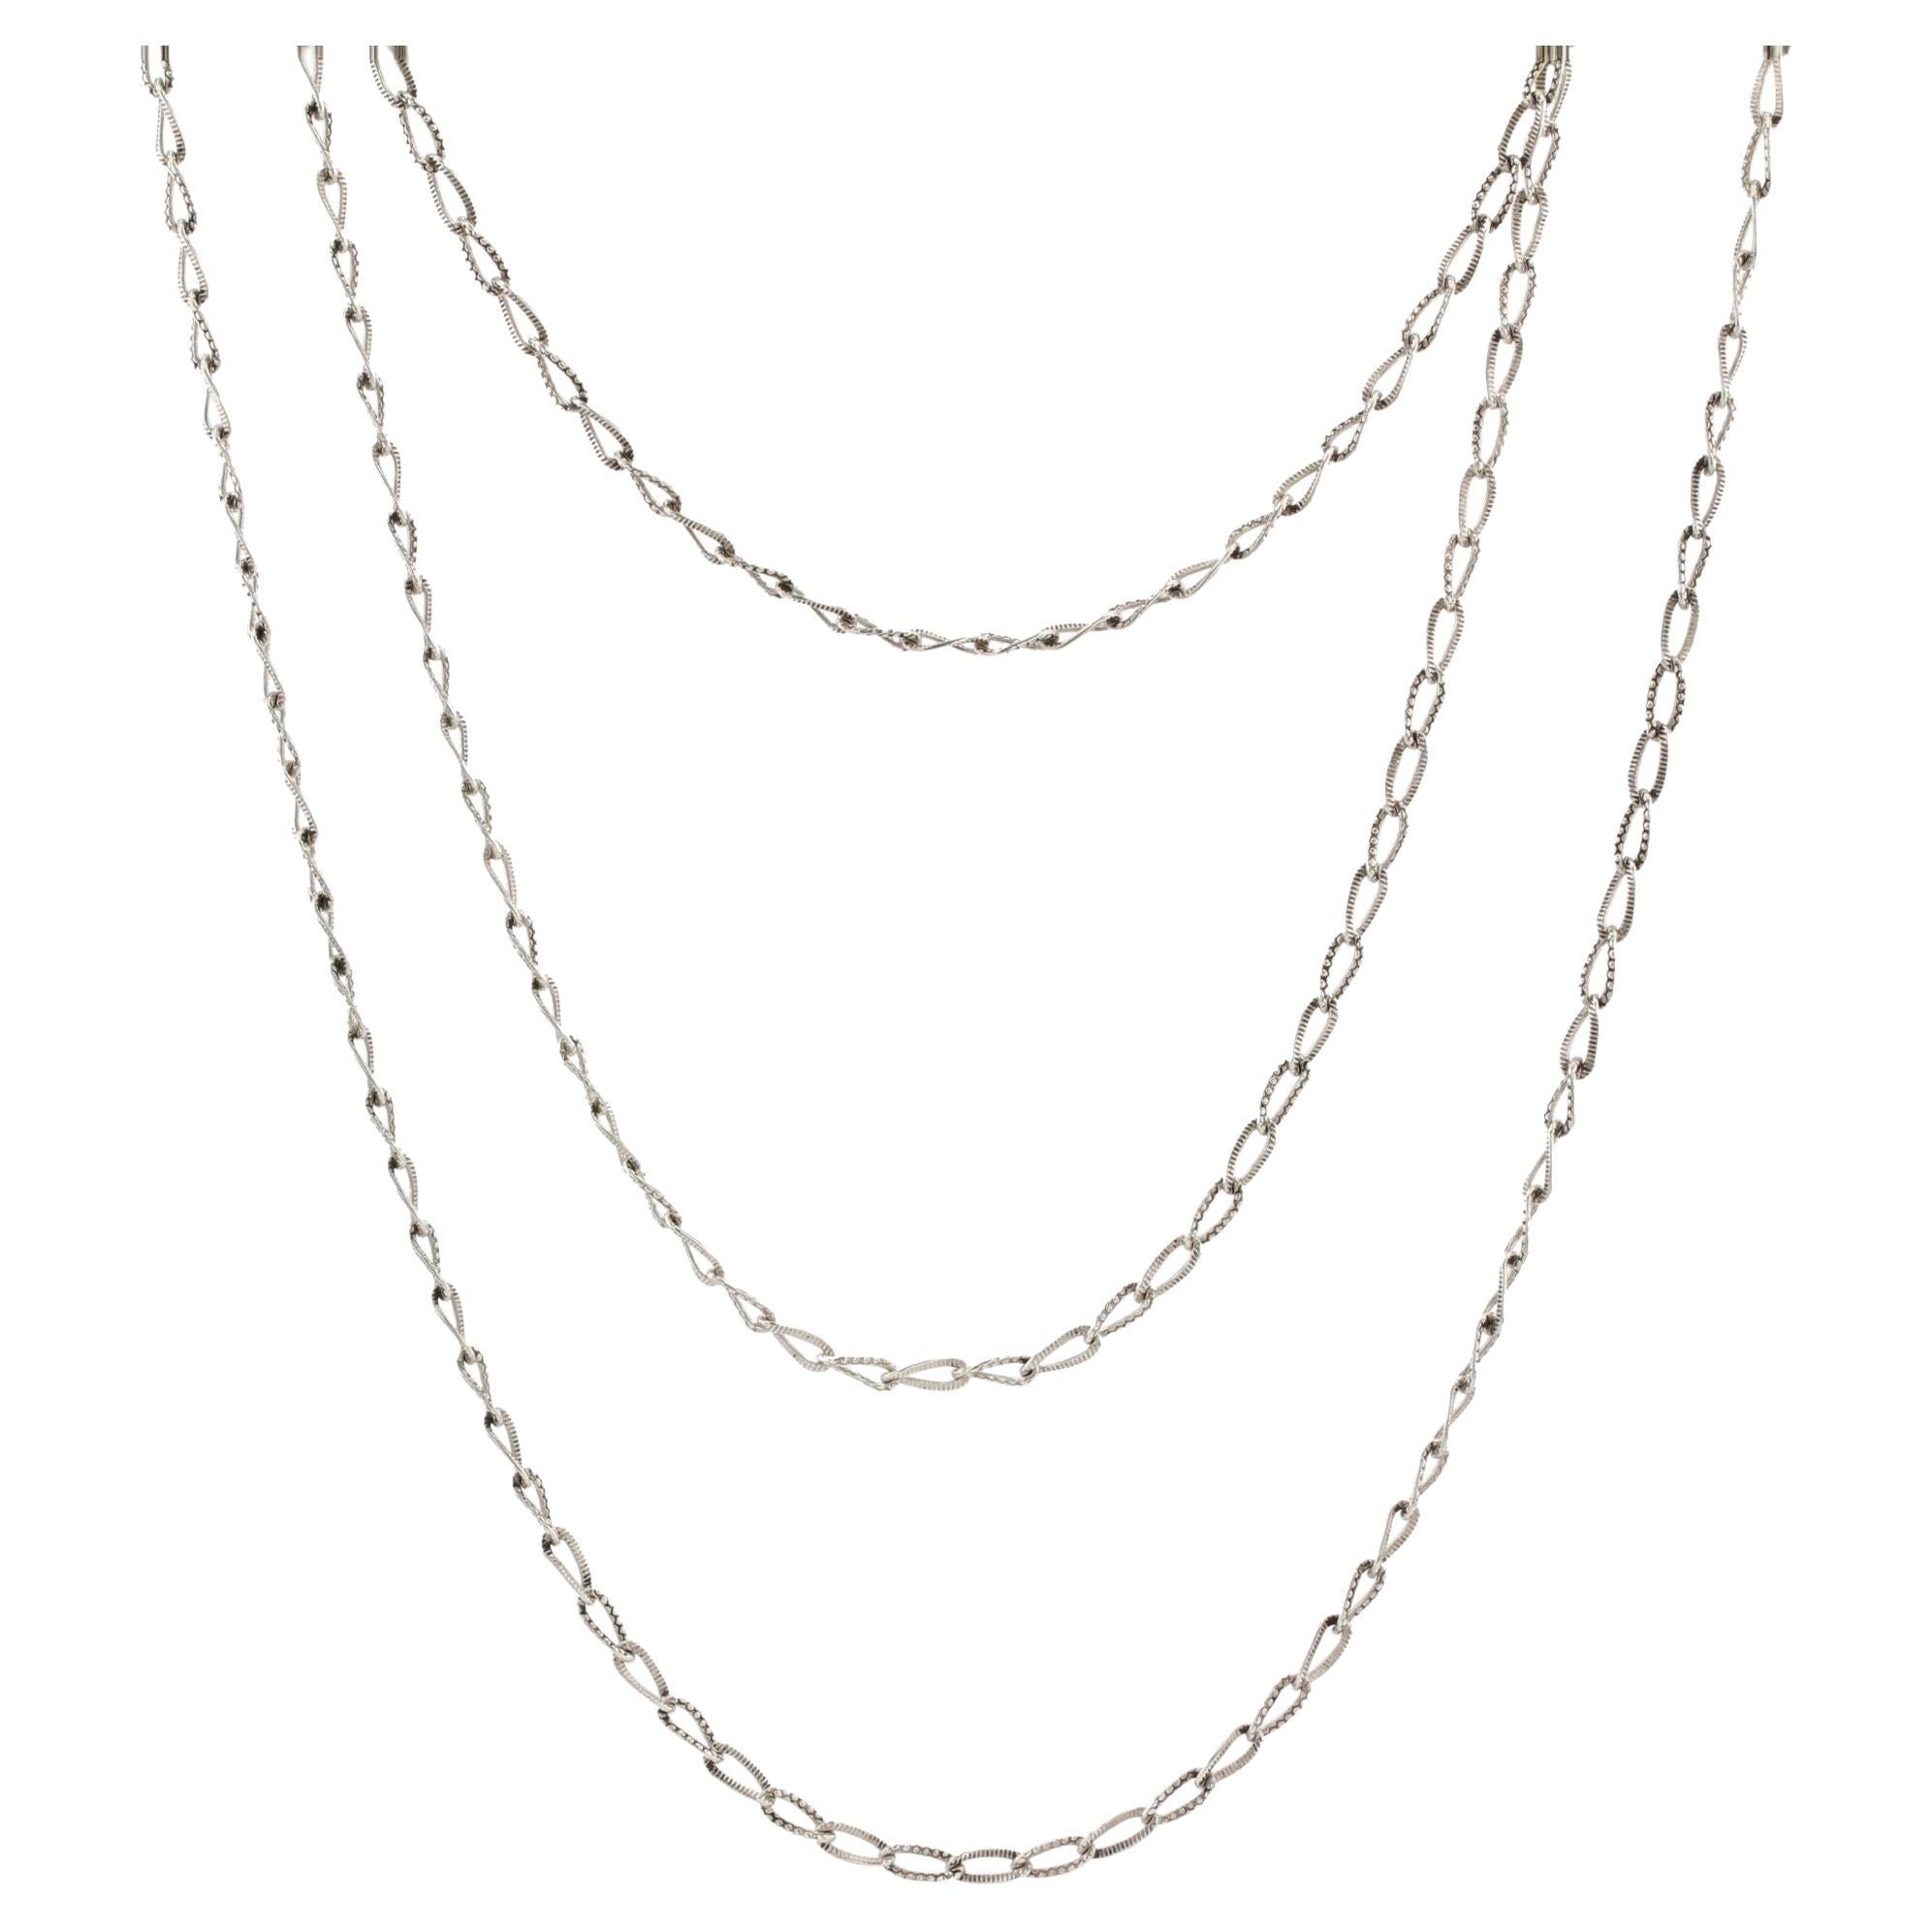 1900s Chiseled Silver Long Chain Necklace